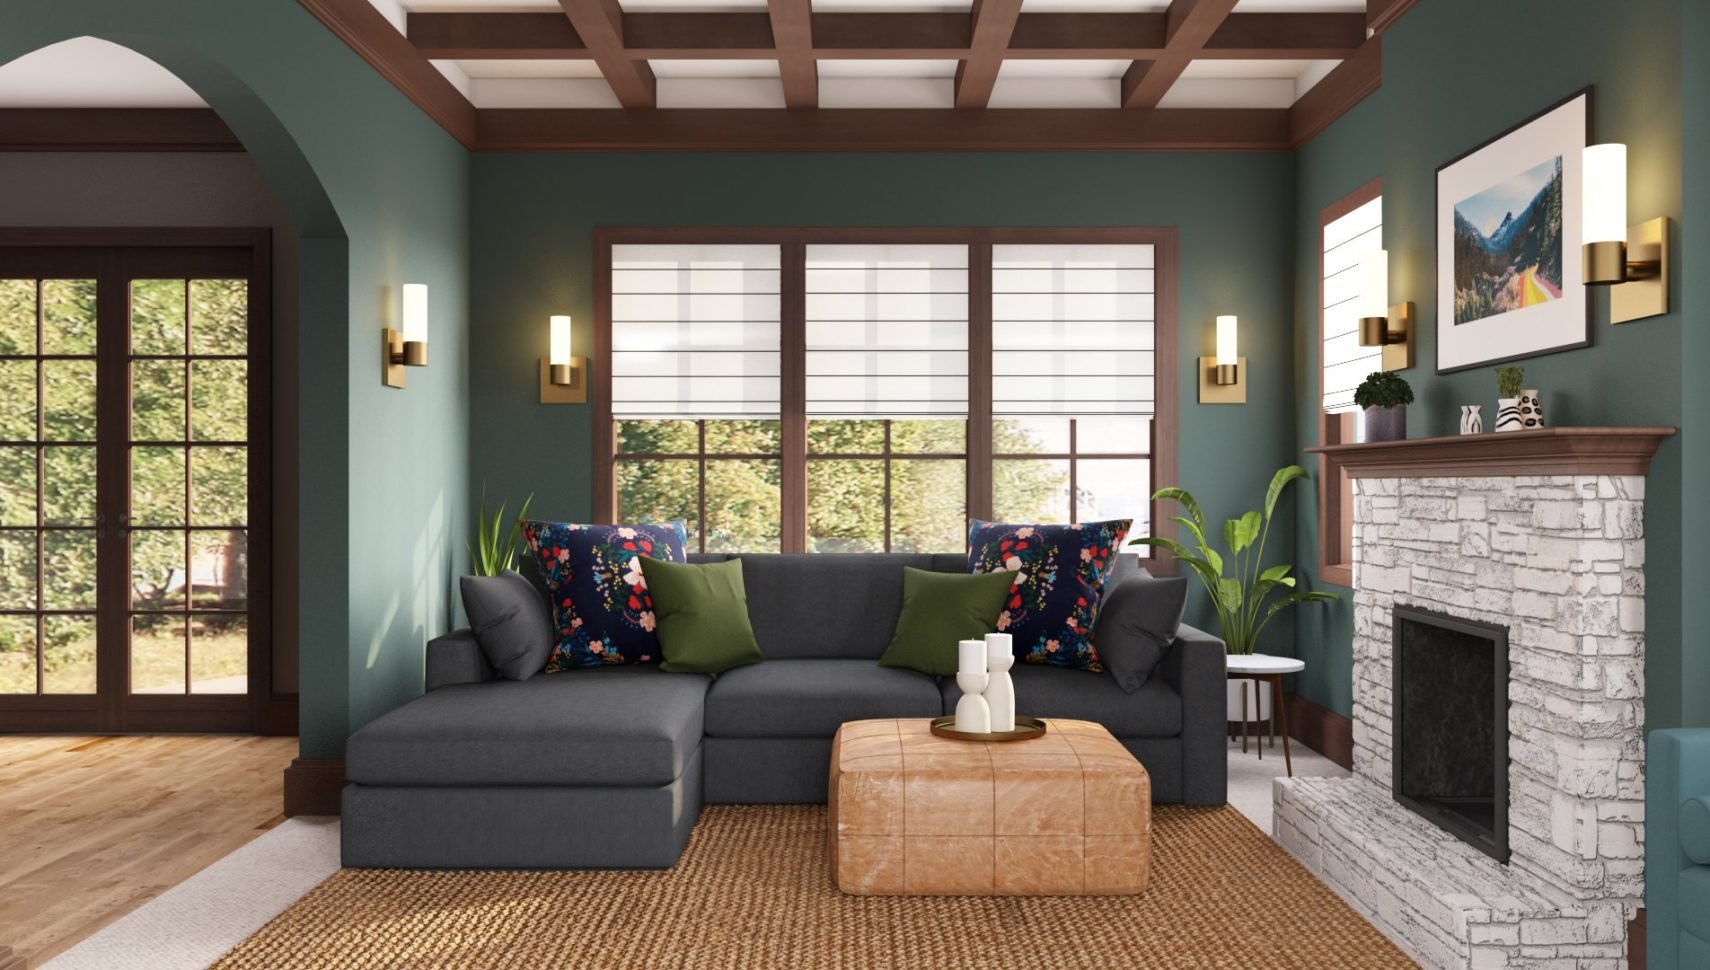 Living Room Color Ideas: 15 Color Schemes To Inspire